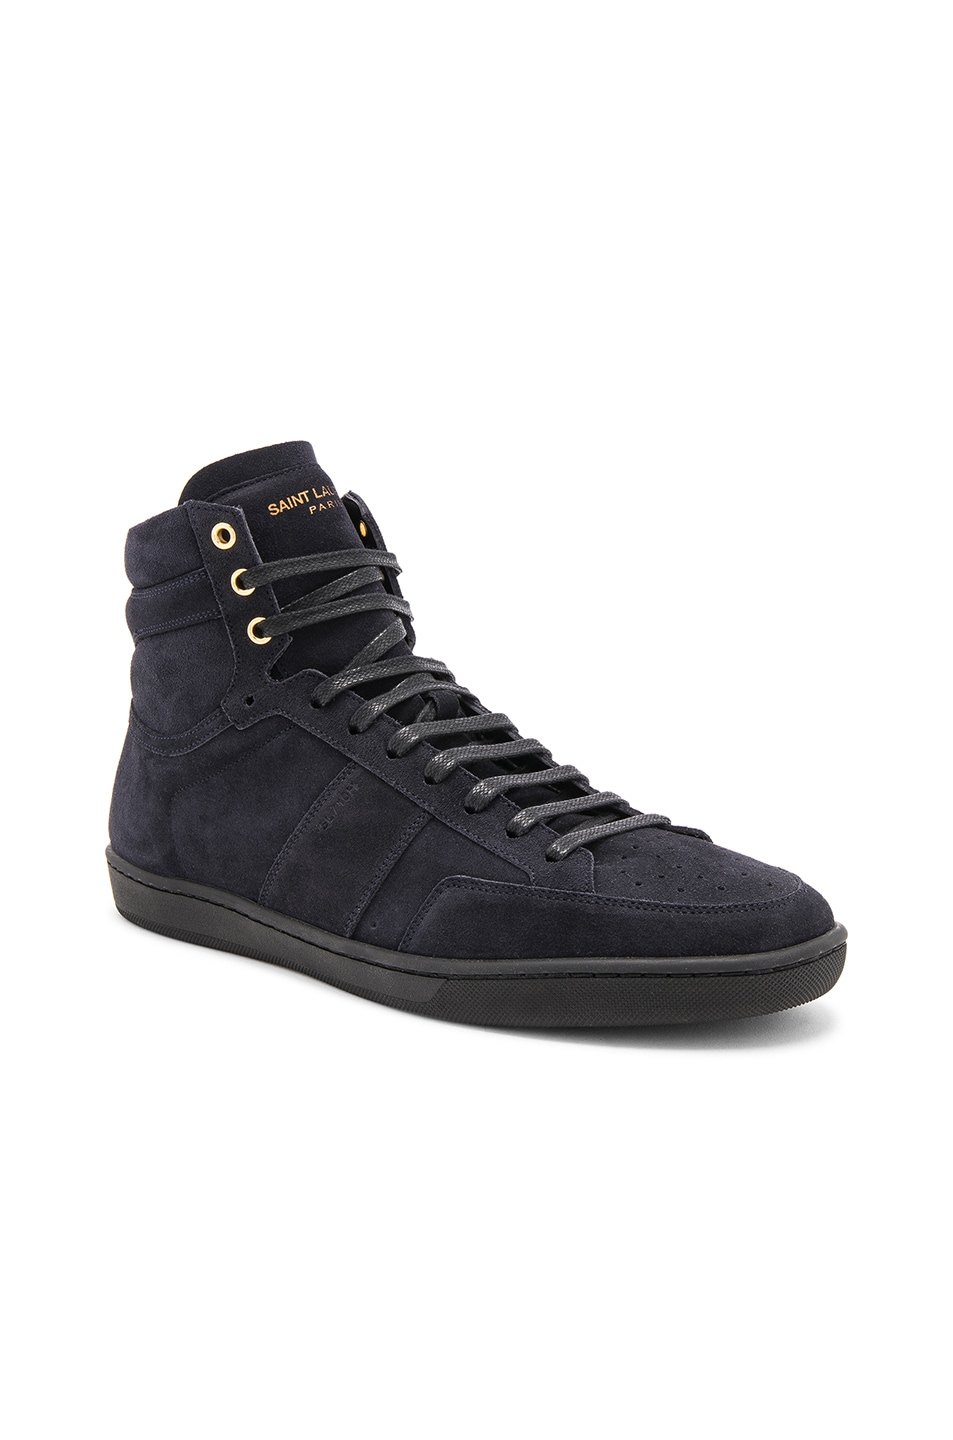 Image 1 of Saint Laurent Signature Court Classic SL/10H Suede High Top Sneakers in Navy